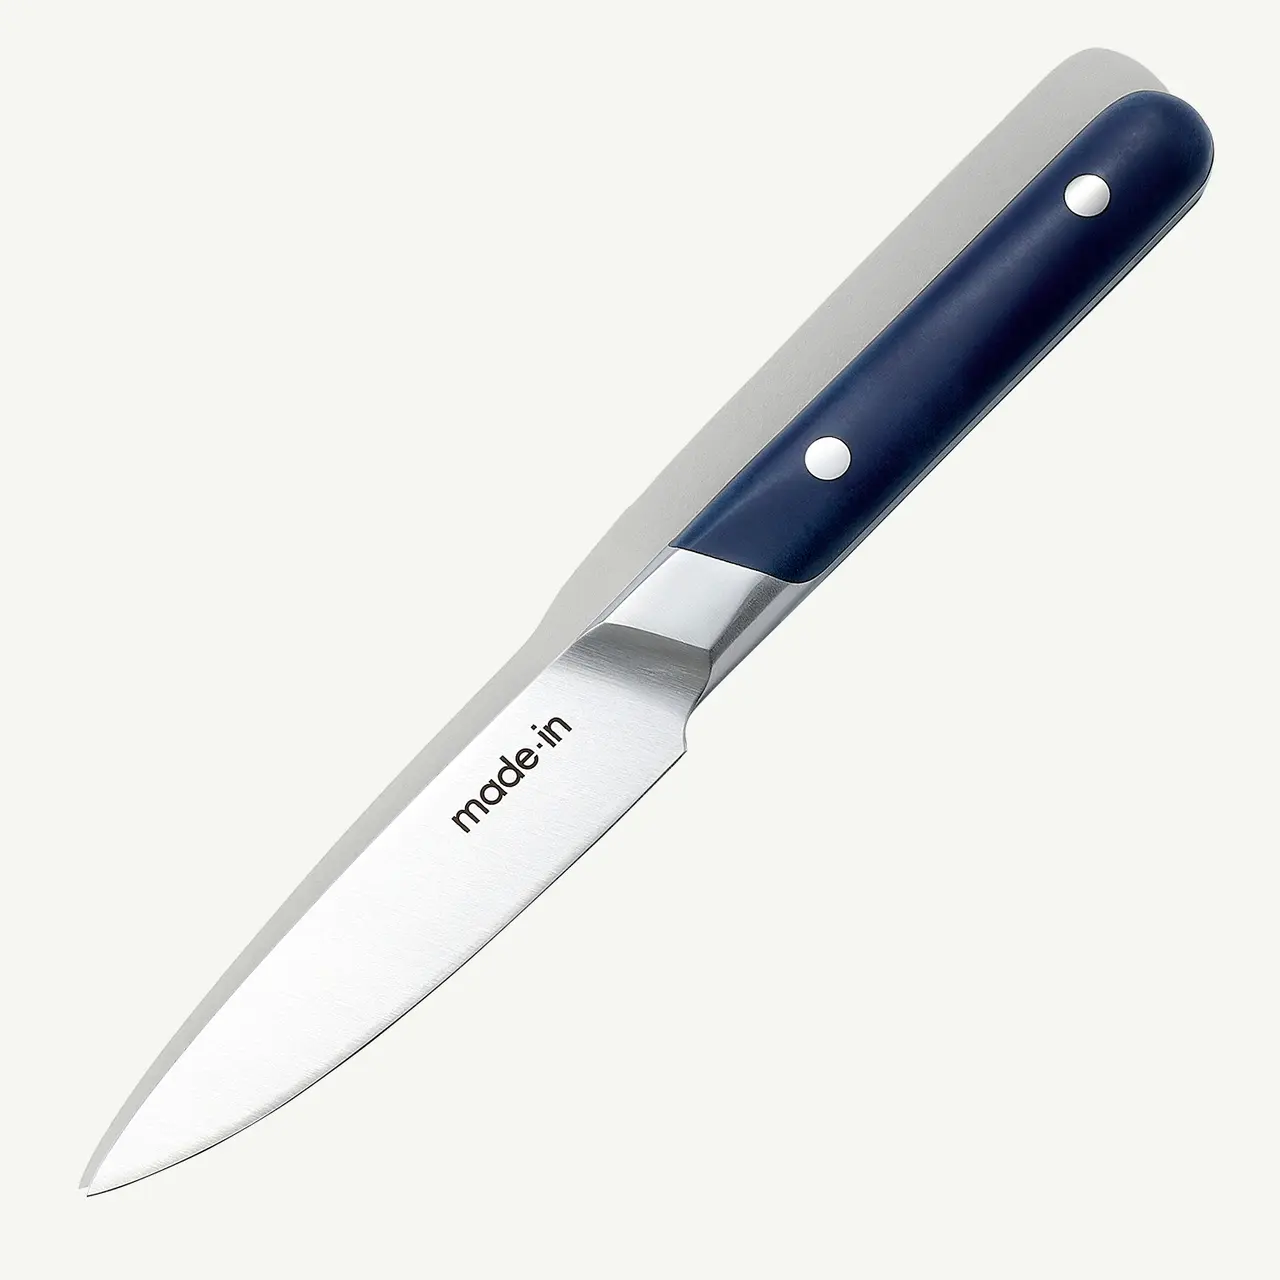 A kitchen knife with a stainless steel blade and a dark handle lies against a light background.